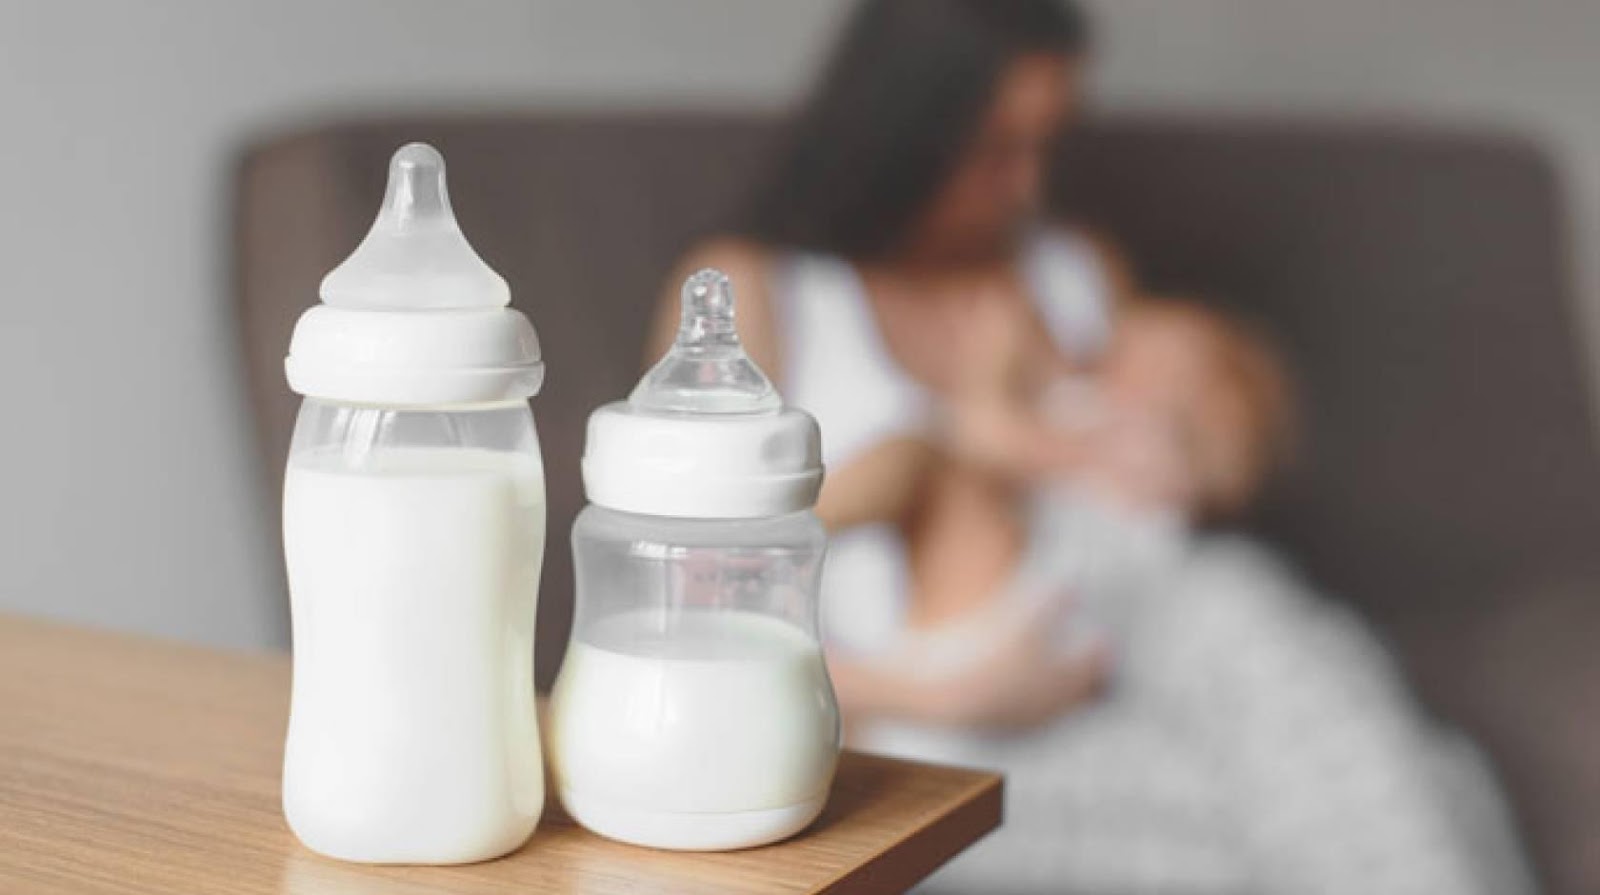 Human breast milk may help babies tell time via circadian signals from mom  | University of California